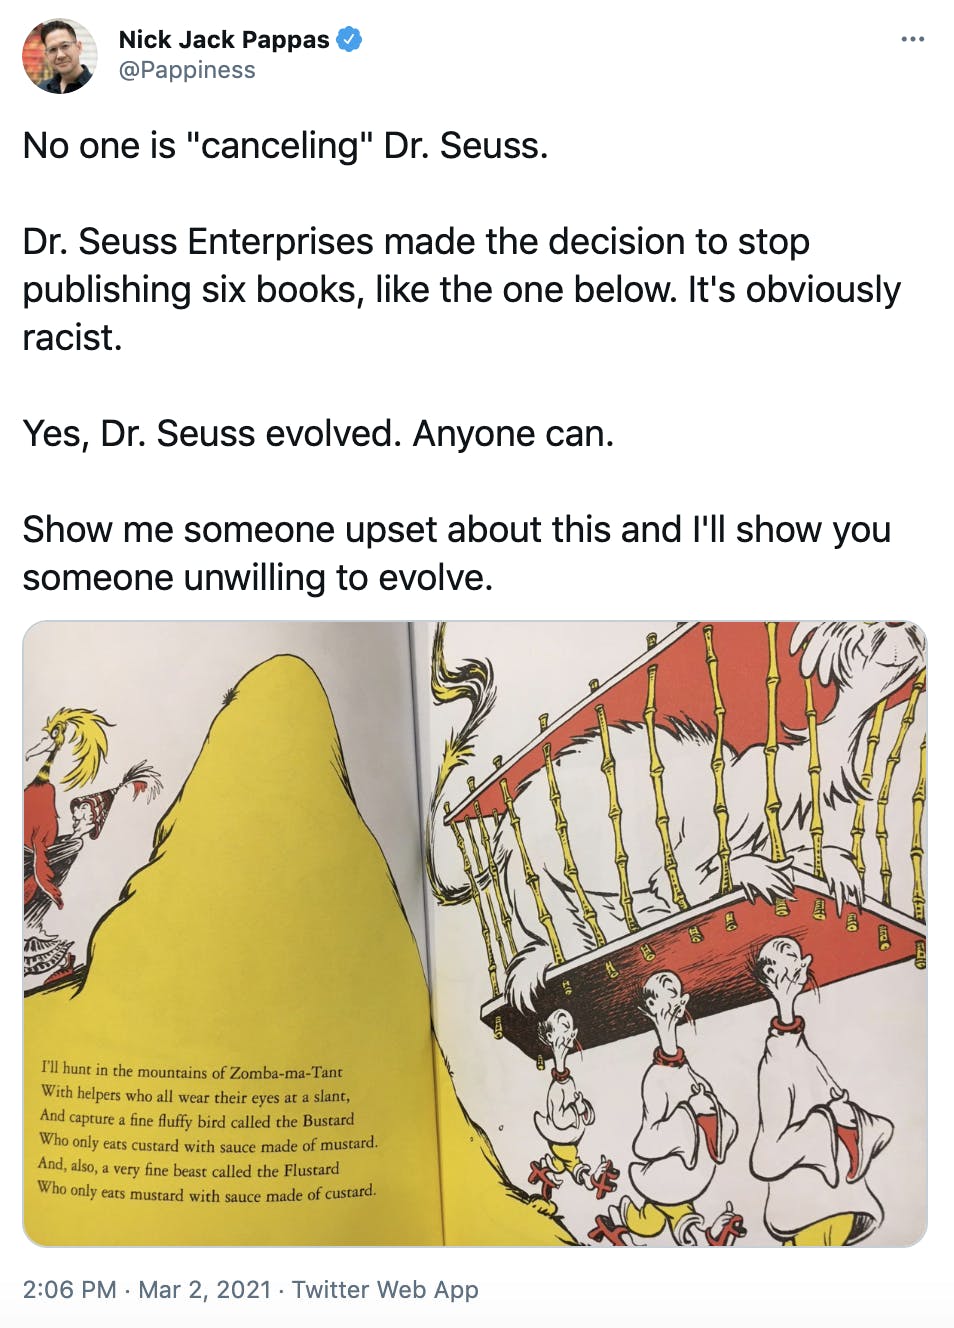 'No one is 'canceling' Dr. Seuss. Dr. Seuss Enterprises made the decision to stop publishing six books, like the one below. It's obviously racist. Yes, Dr. Seuss evolved. Anyone can. Show me someone upset about this and I'll show you someone unwilling to evolve.' photograph of a page from a Dr. Seuss book featuring three racist caricatures of Chinese men carrying a cage with a fluffy creature in it on their heads